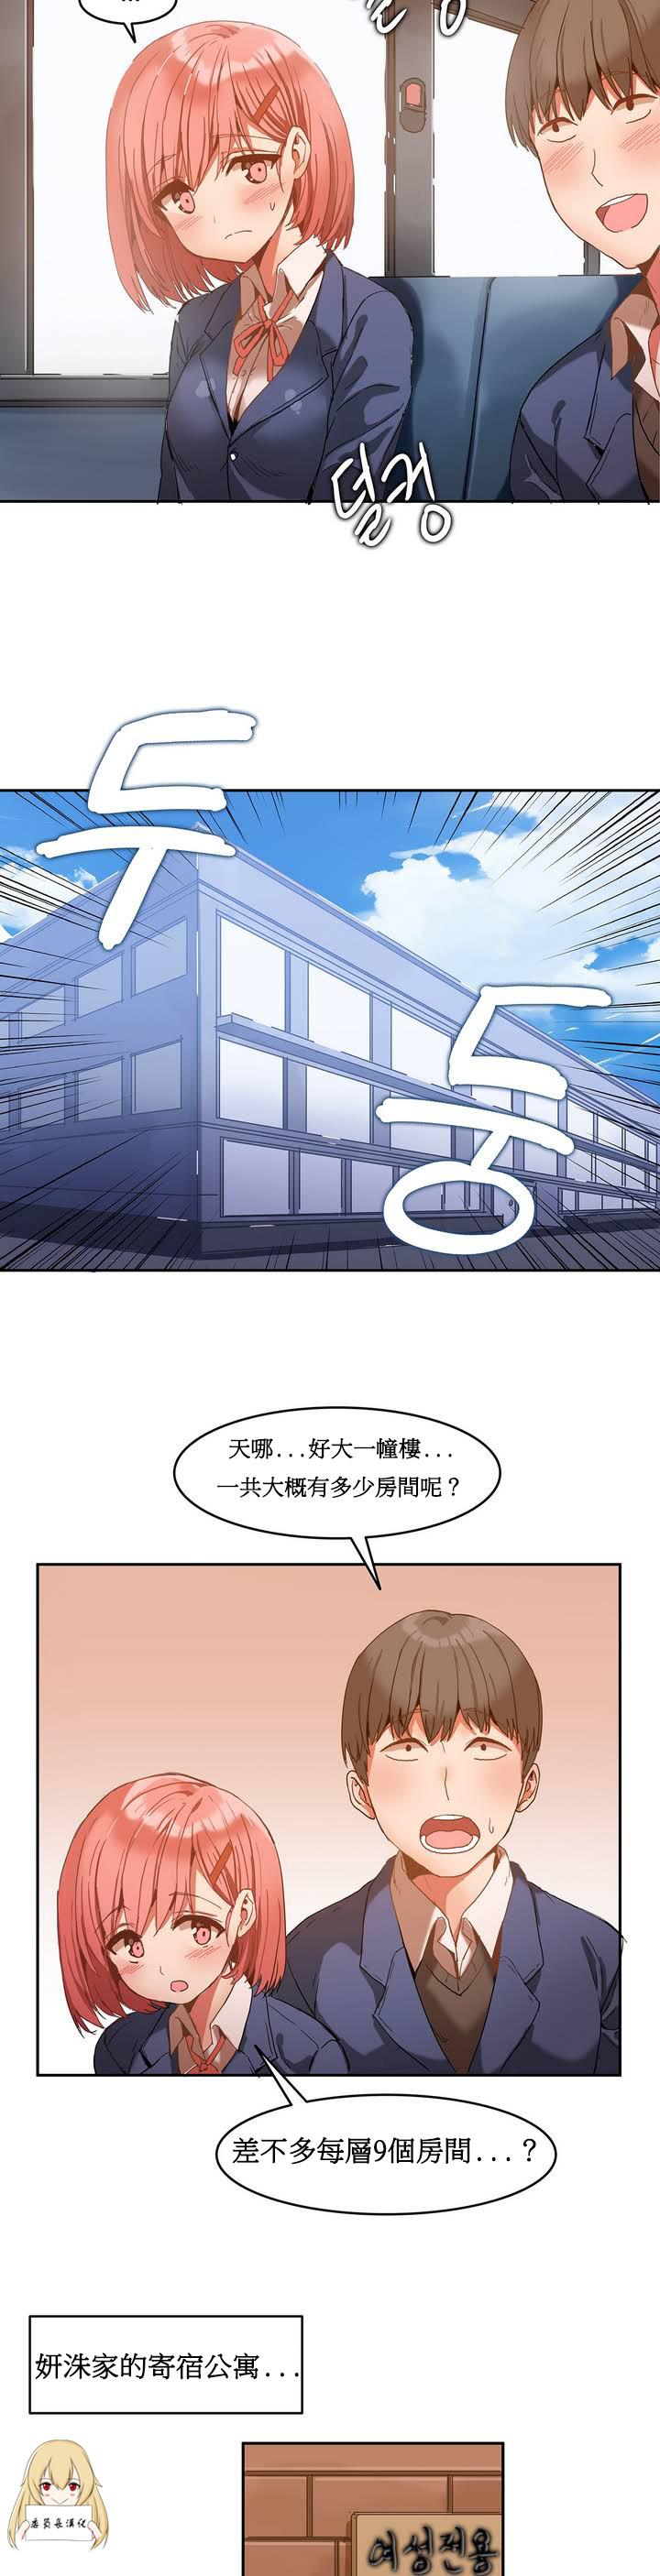 Cougars Hahri's Lumpy Boardhouse Ch. 1~14【委員長個人漢化】（持續更新） Bucetuda - Page 11